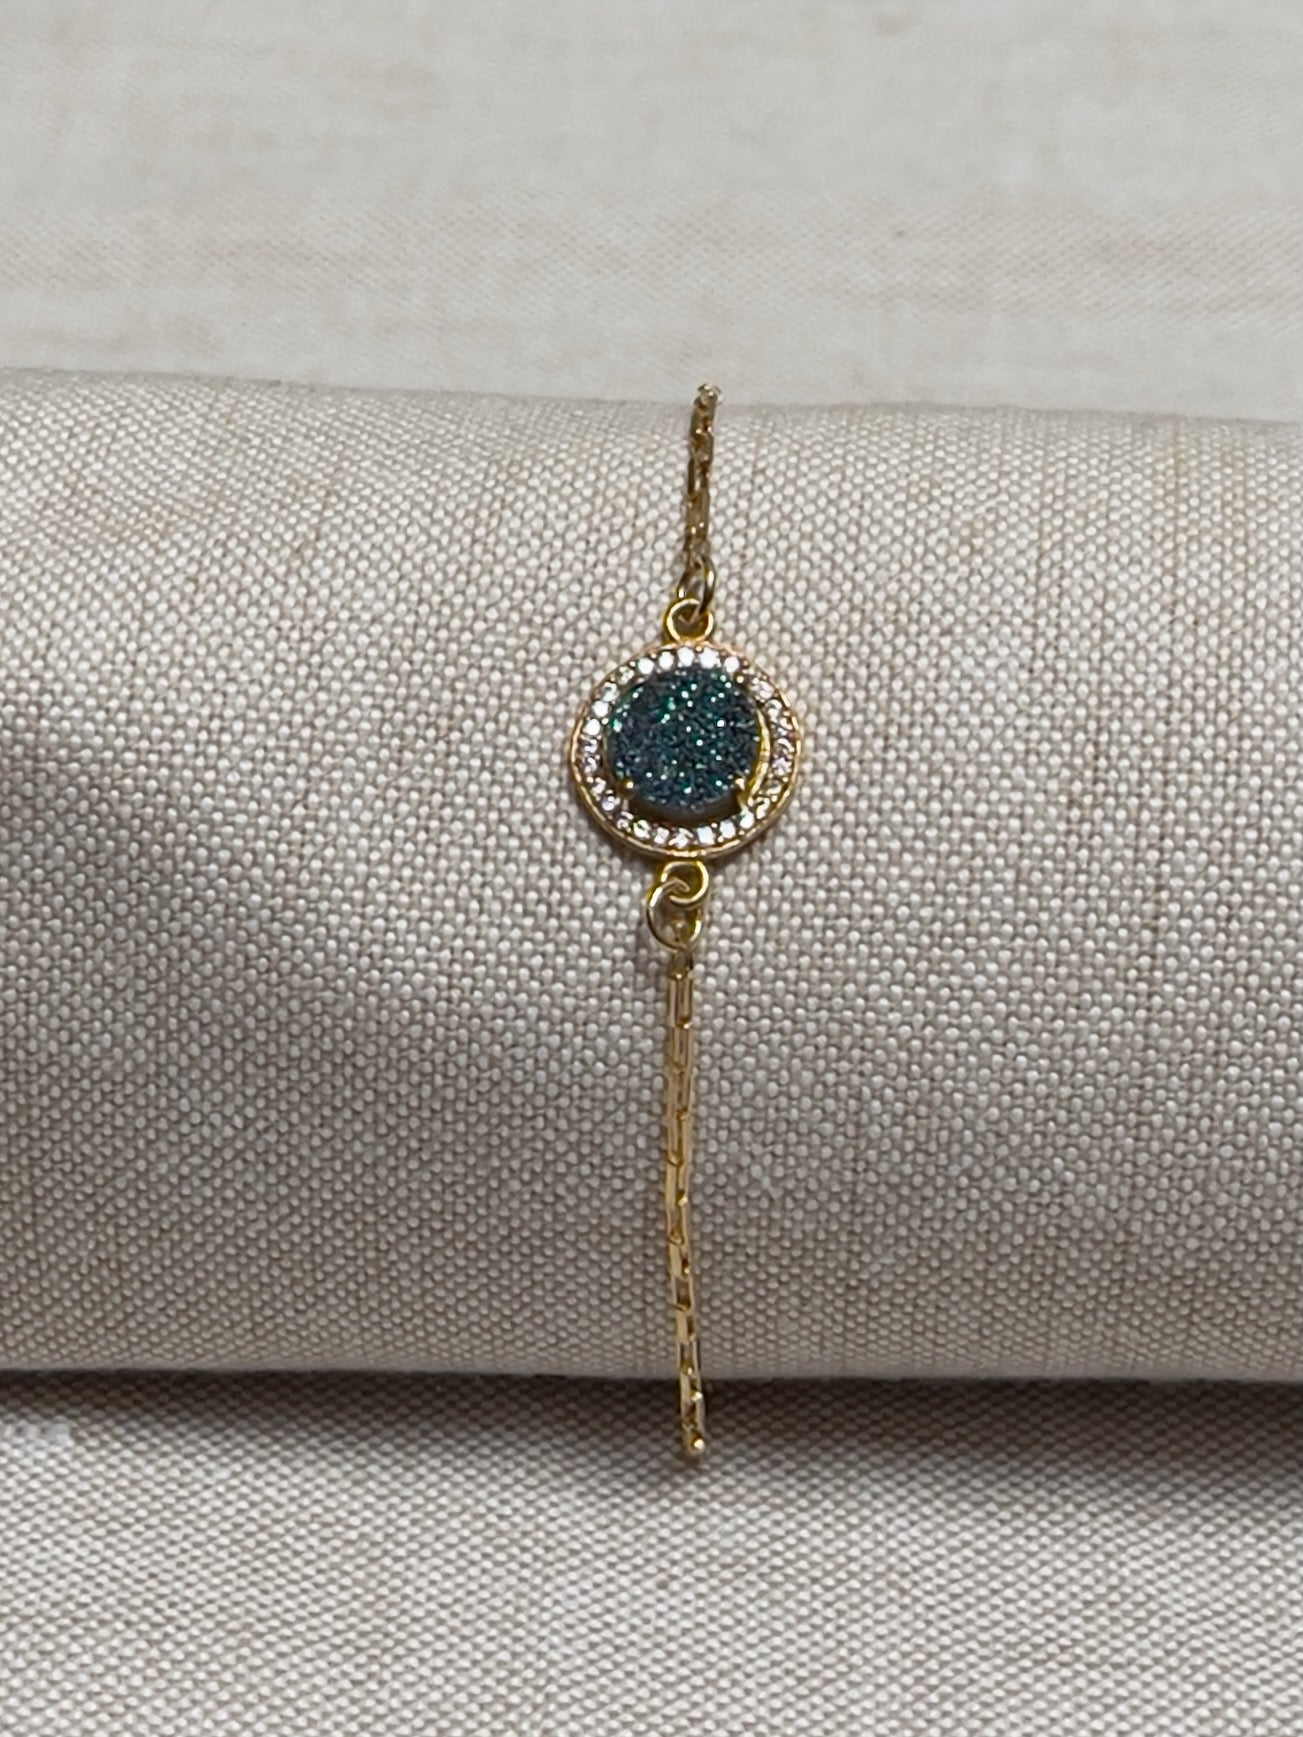 Image of bracelet. Chain Type: Elongated venetian Chain Thickness: 1.2 mm Clasp: Lobster  Chain: 12k Gold-filled Charm: Blue green druzy made of gold vermeil with CZ micro-pave